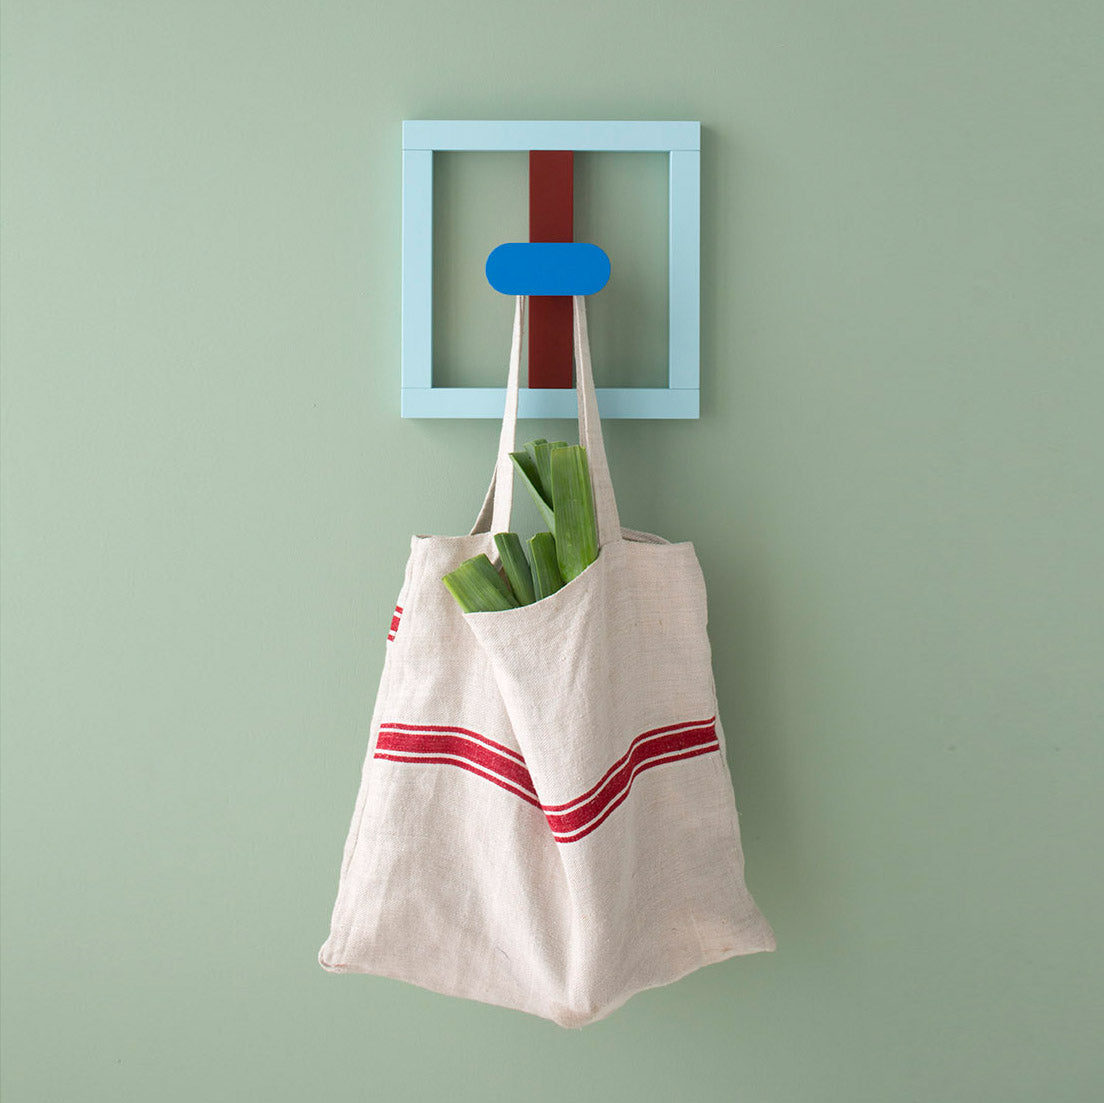 Hooks Nathalie Pasquier Small Store Rack – by - Raawii Design Du Coat MoMA